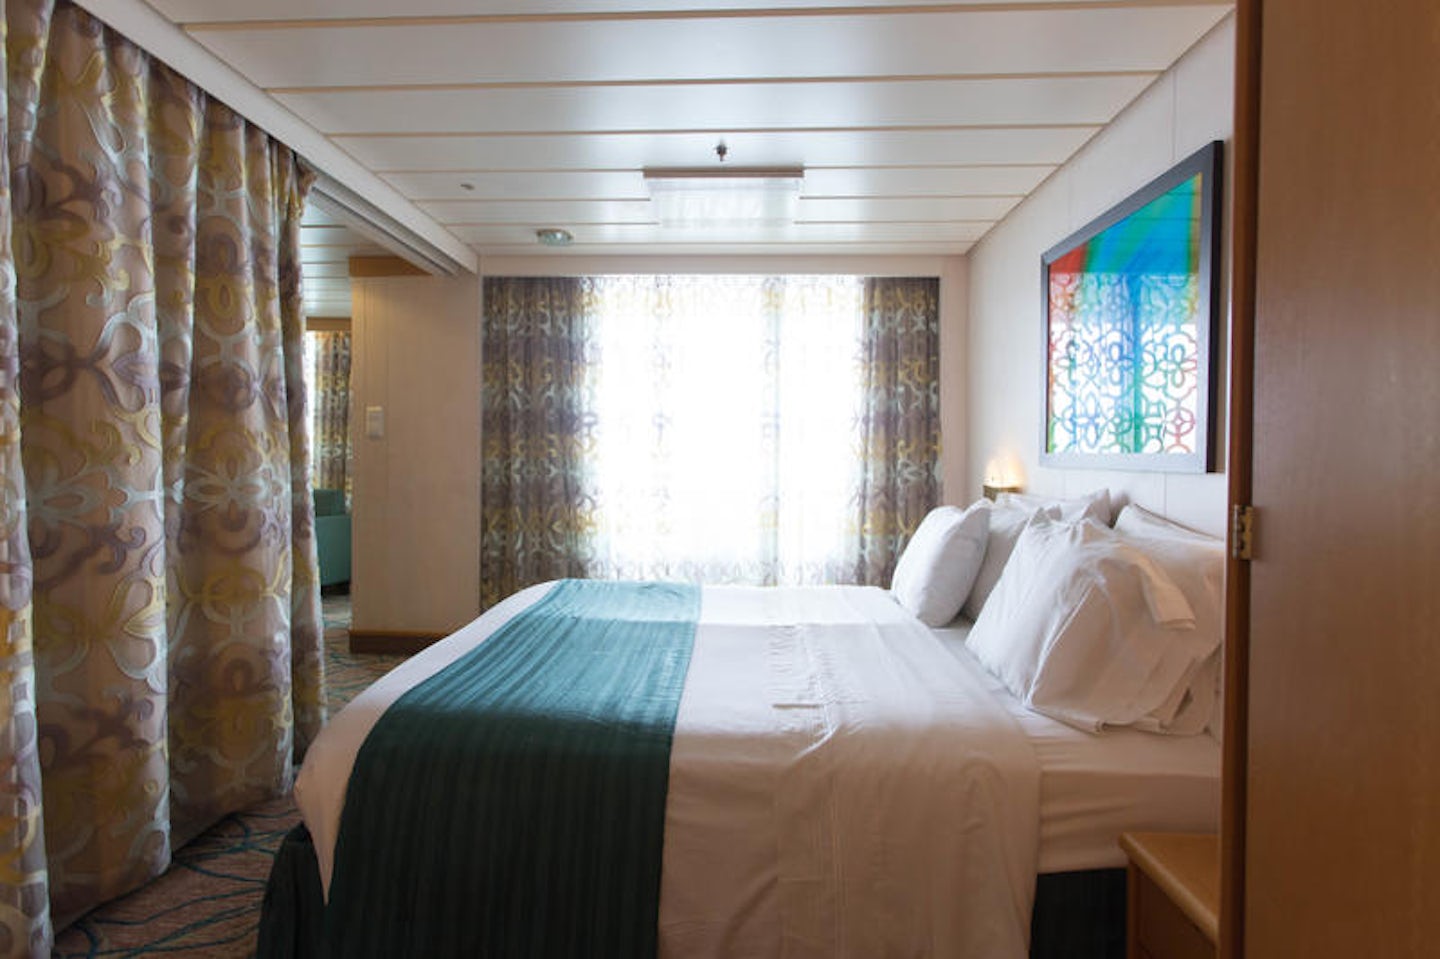 The Family Oceanview Cabin on Enchantment of the Seas